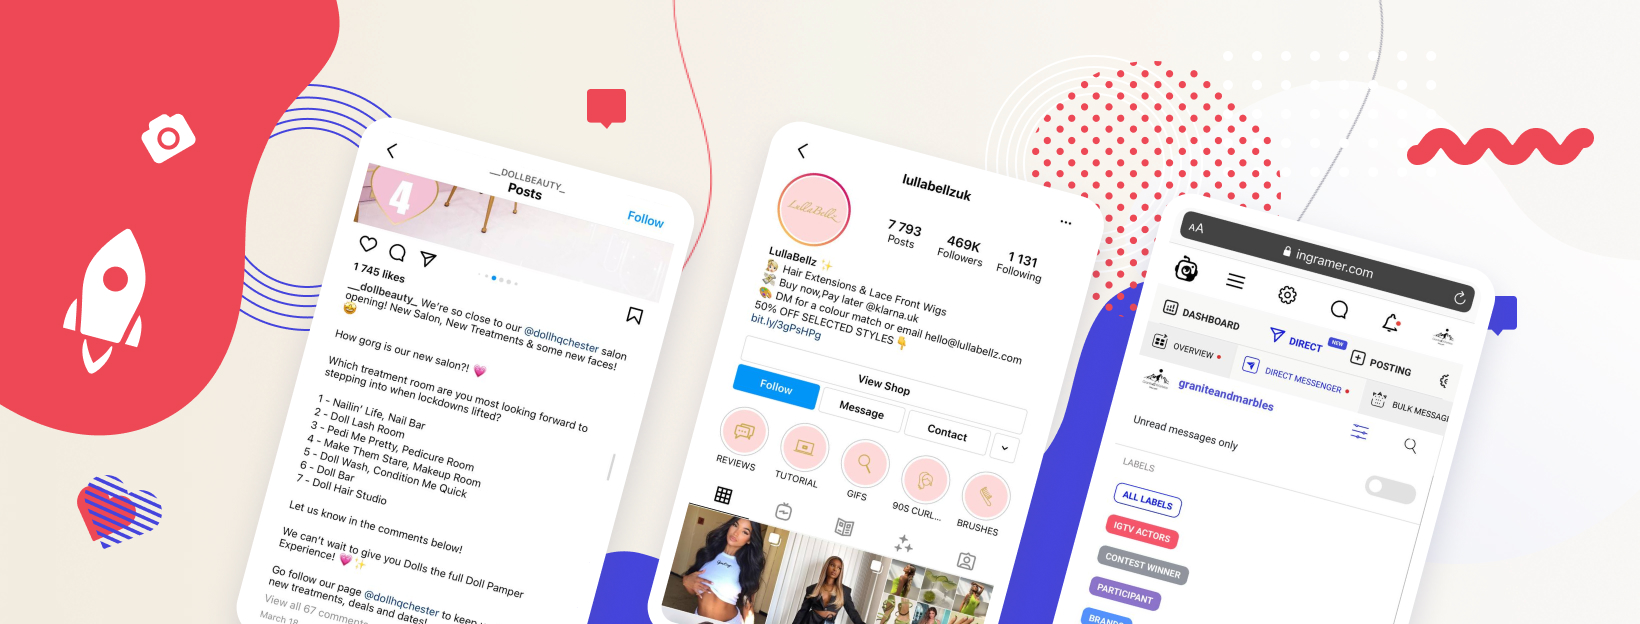 Online sales on Instagram: top content examples to stimulate engagement with potential clients